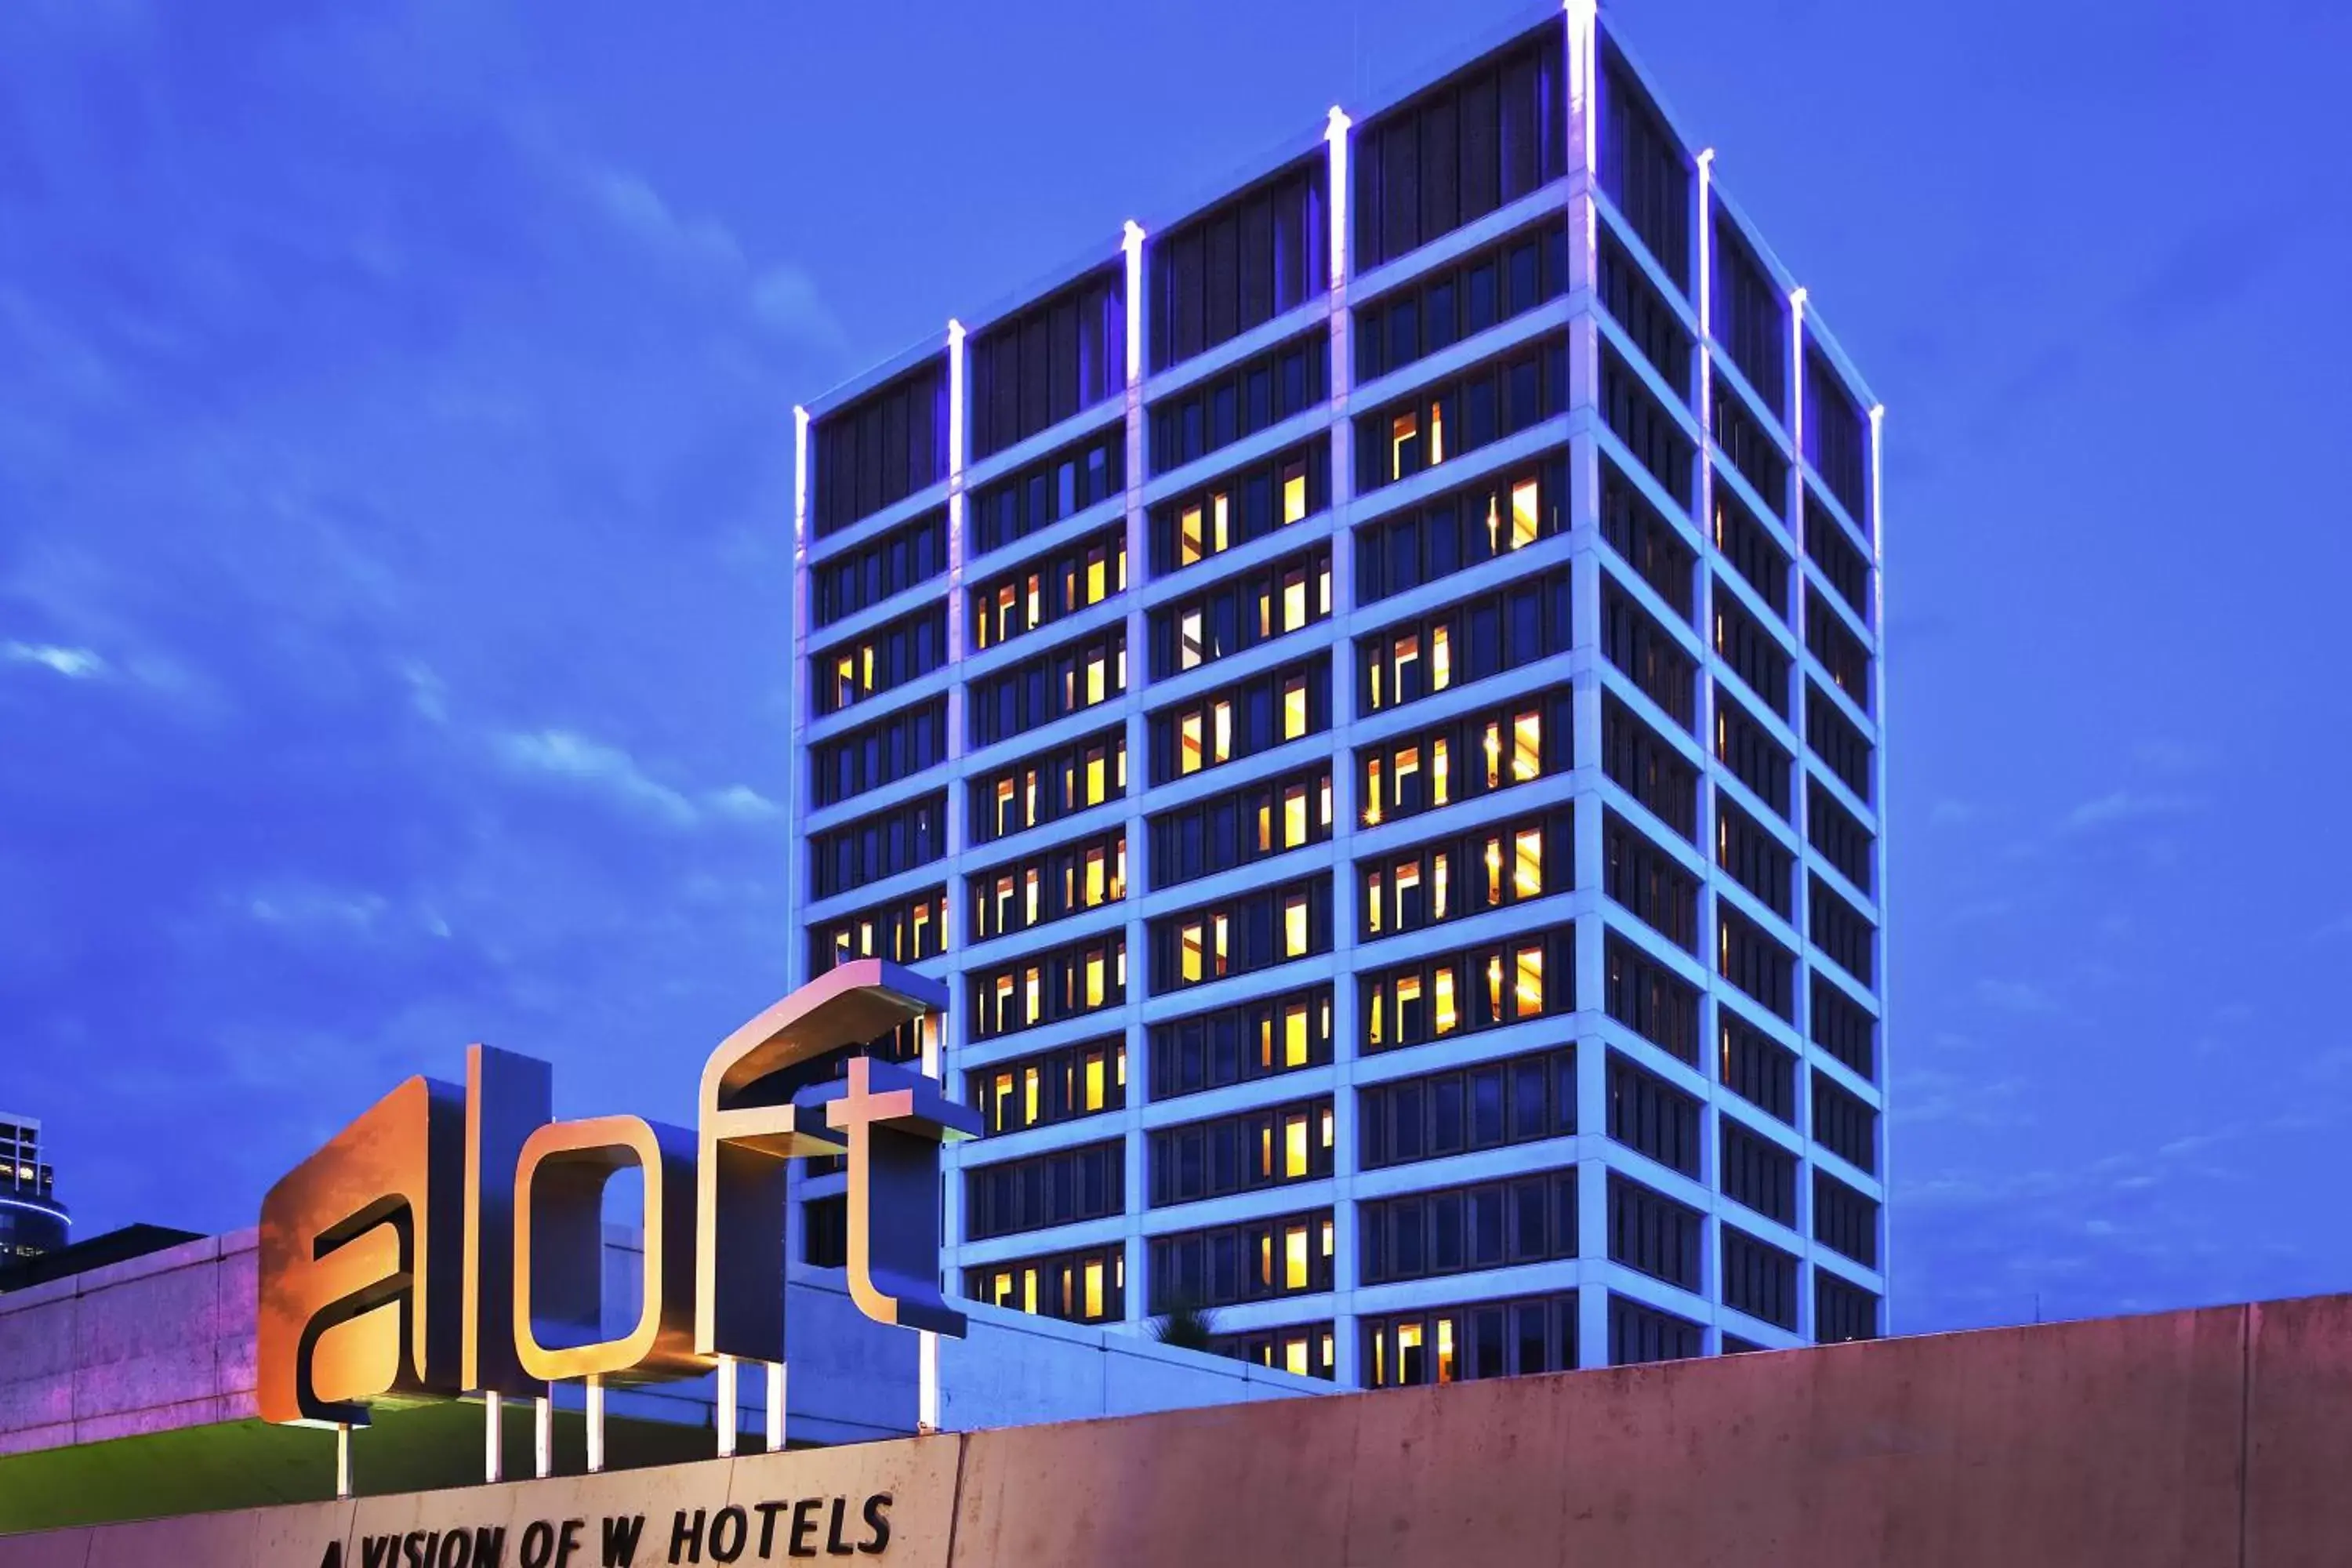 Property Building in Aloft Tulsa Downtown